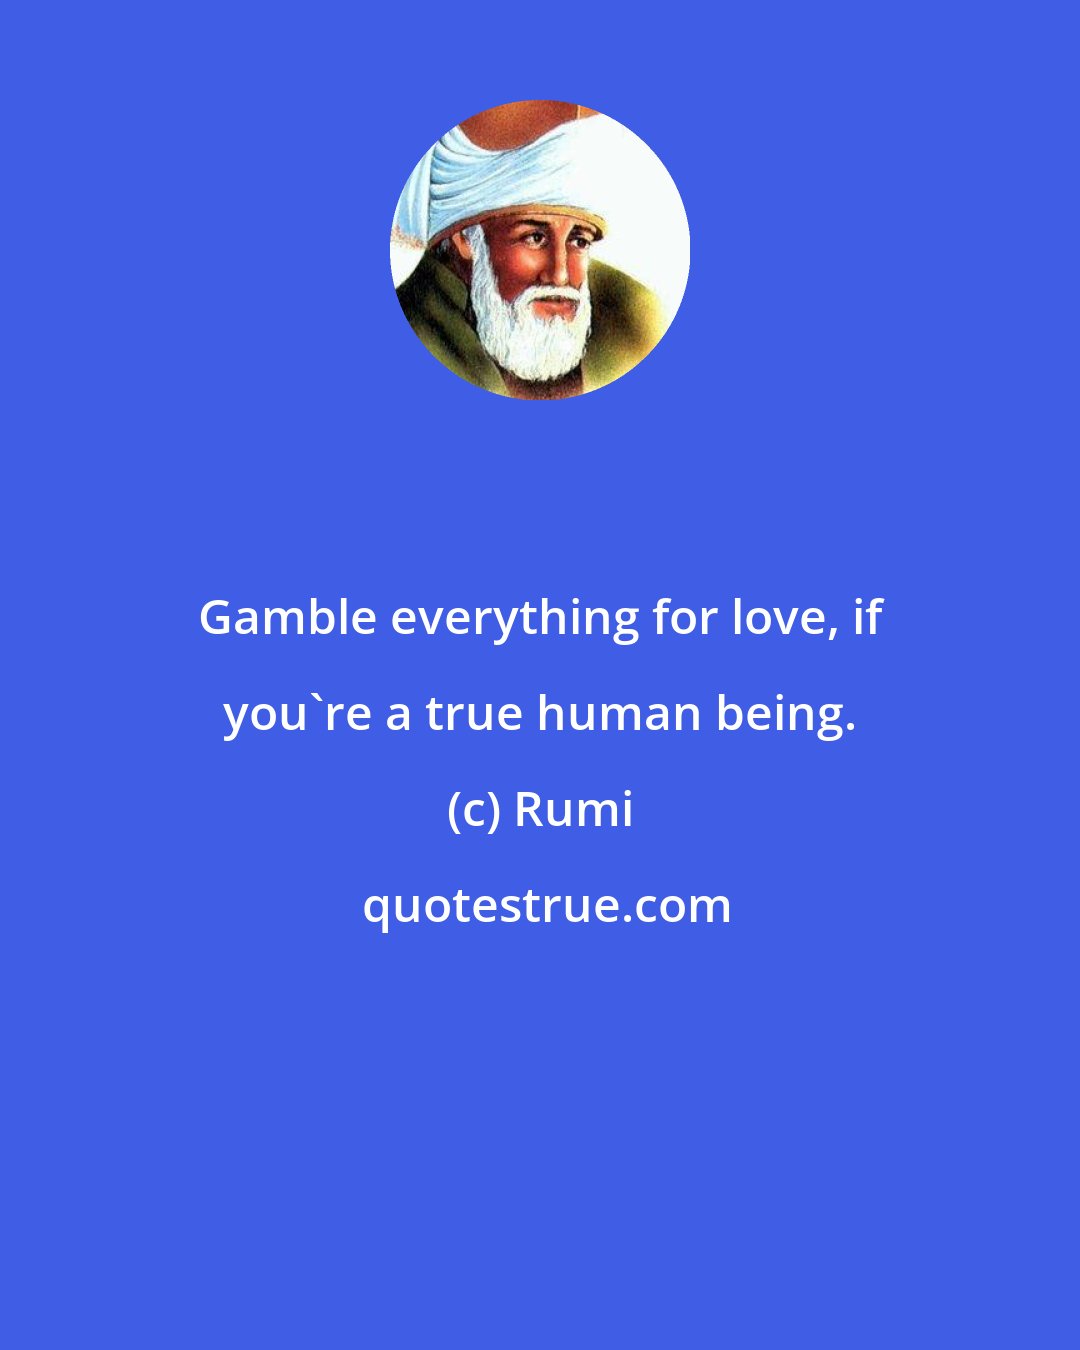 Rumi: Gamble everything for love, if you're a true human being.